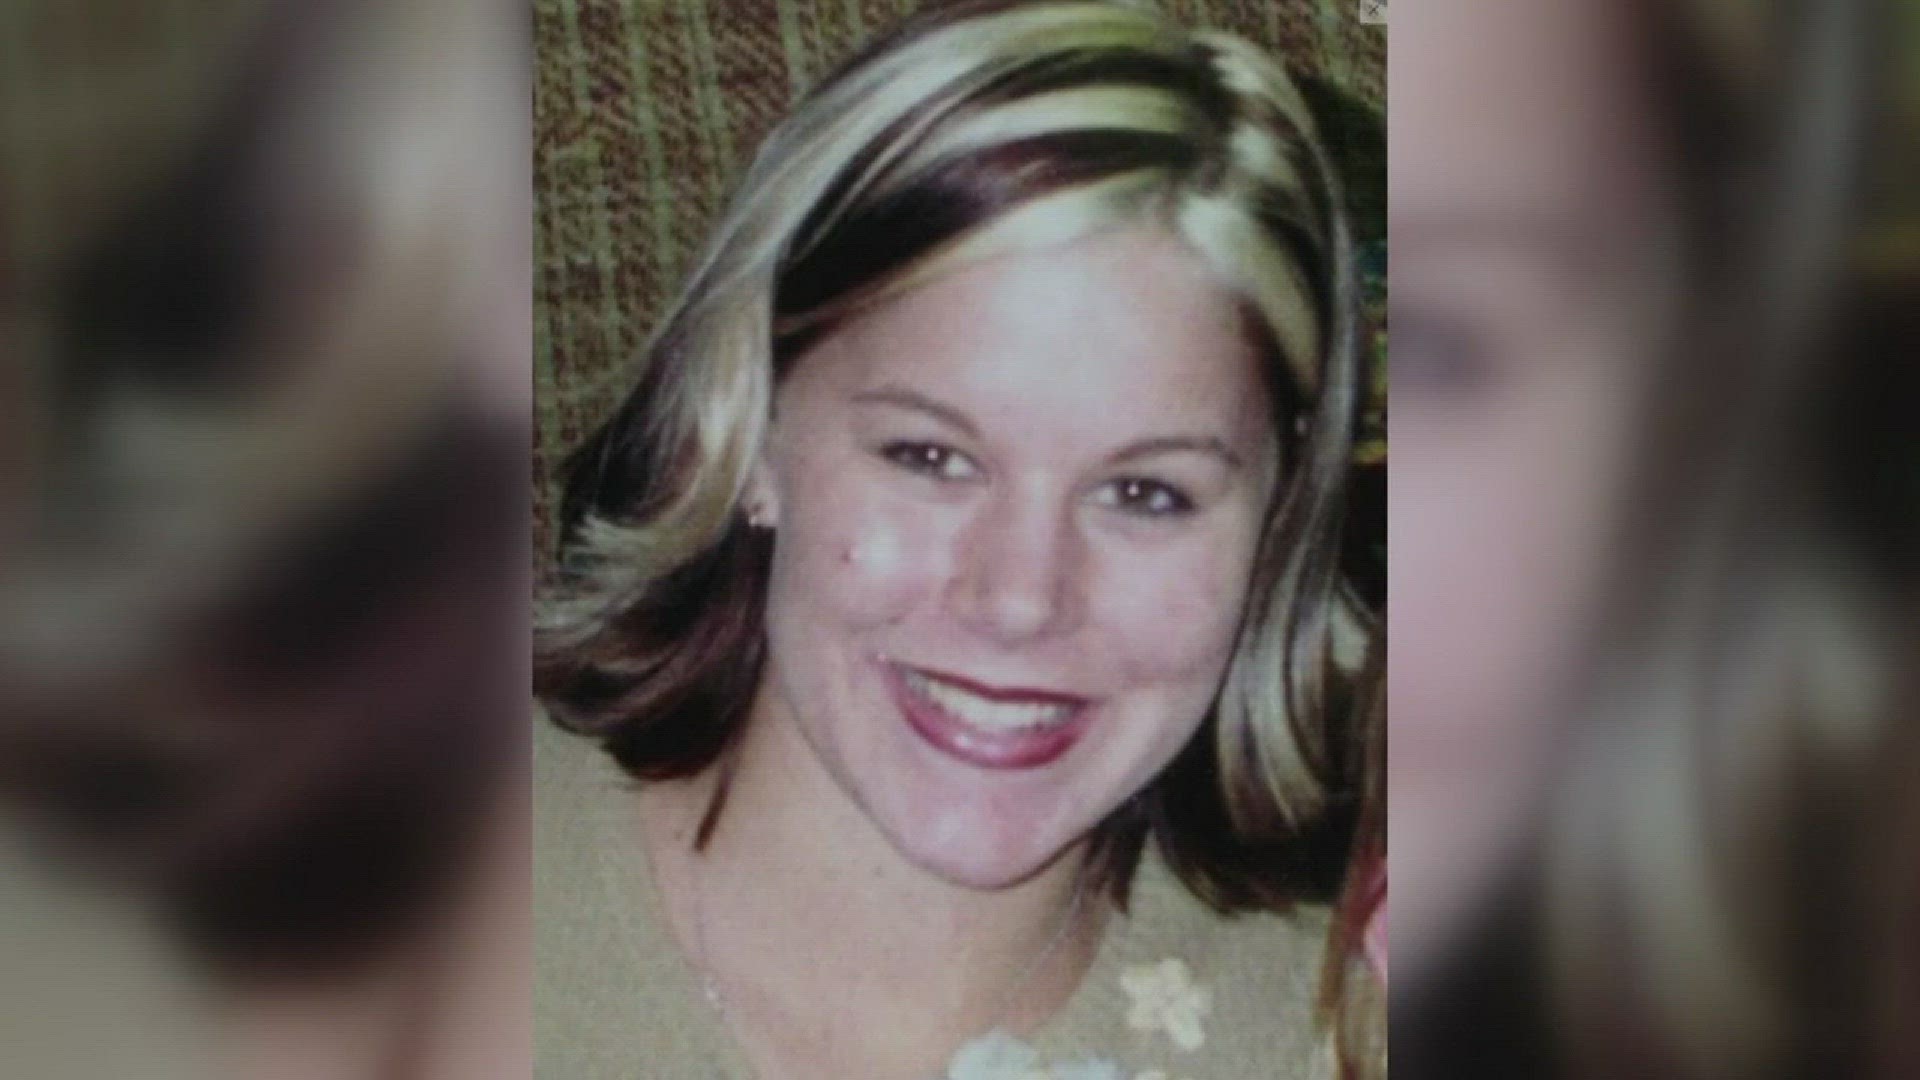 The Williamson County Sheriff's office has announced a new reward for information on a missing persons case.